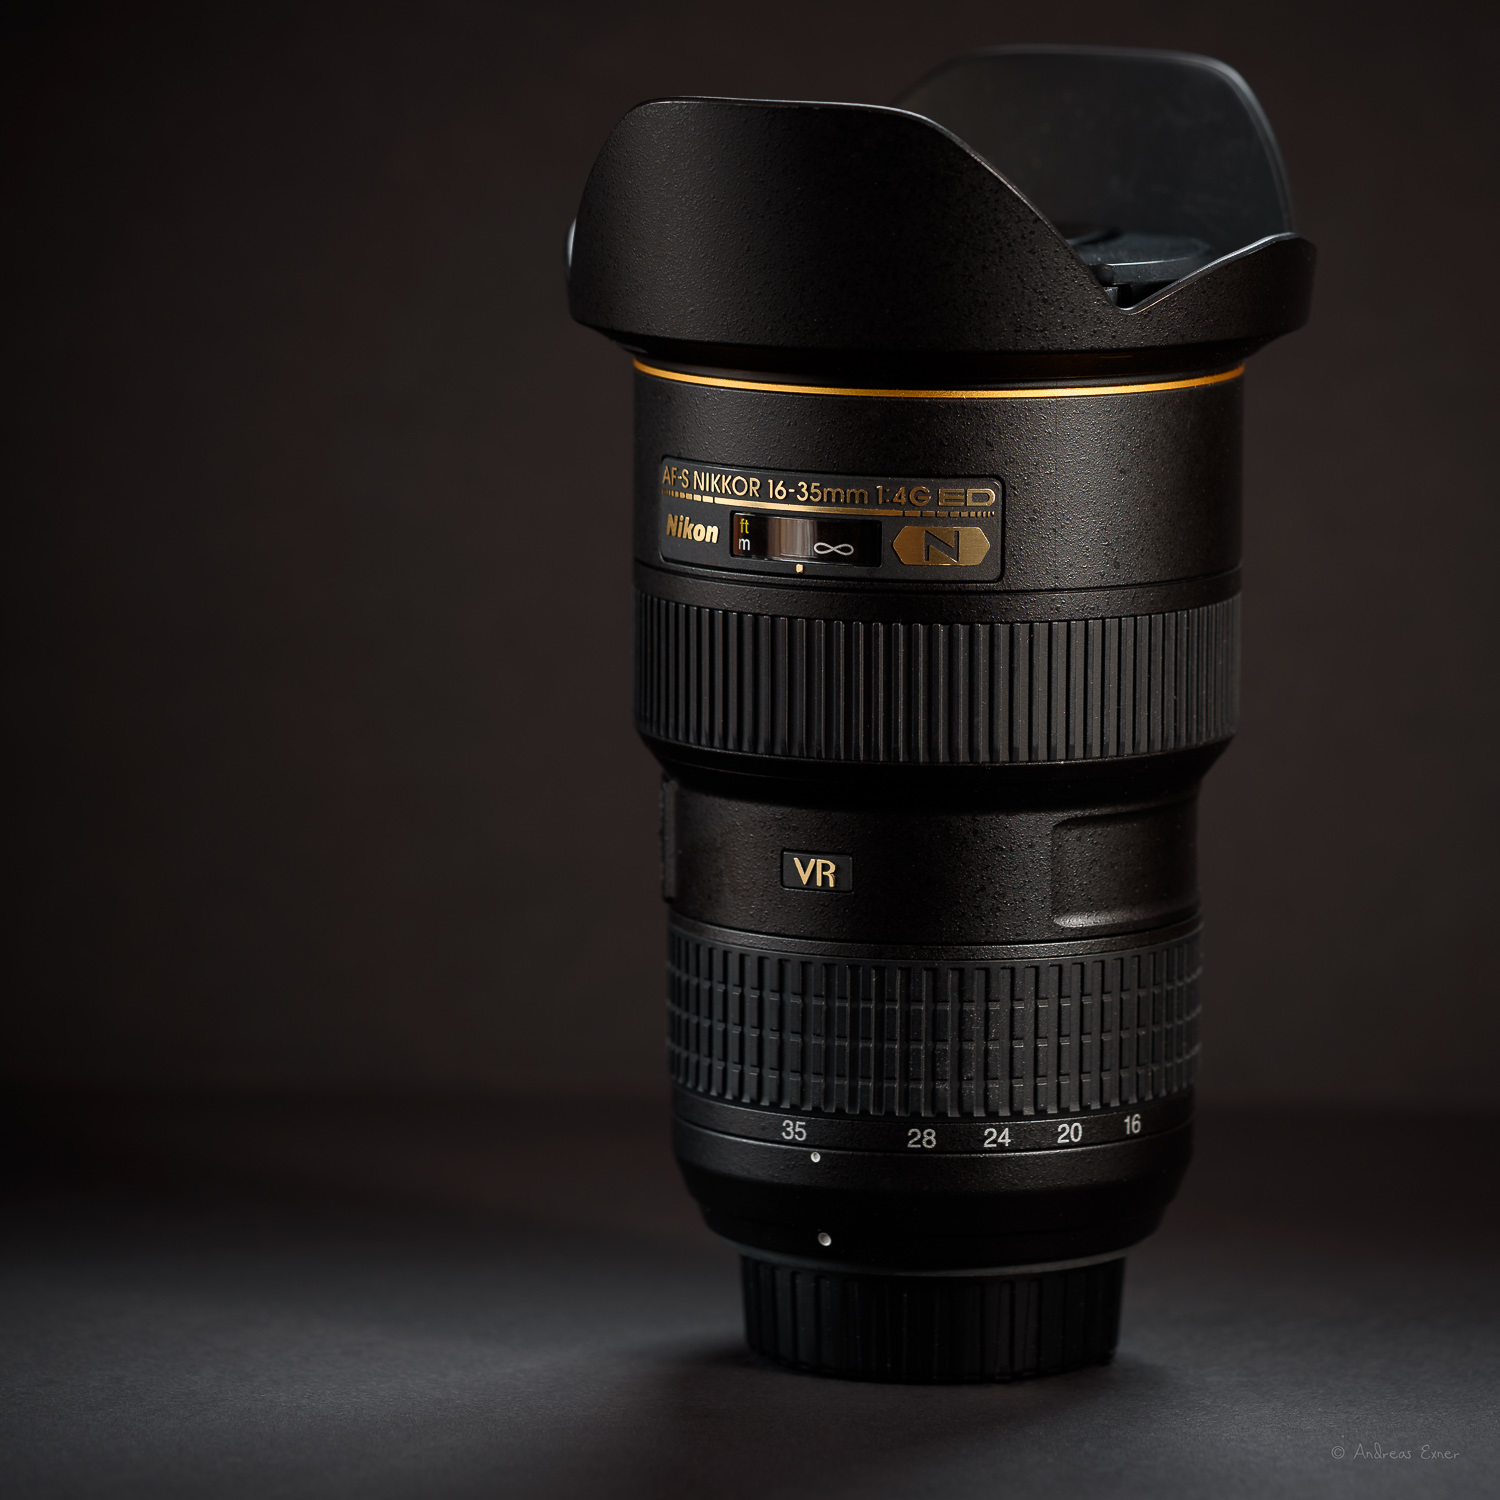  NIKON AF-S Nikkor 16-35mm f/4G ED VR  This is my favorite for landscape photography. A wicked sharp lens. Highly recommended!  ★ ★ ★ ★ ★ 